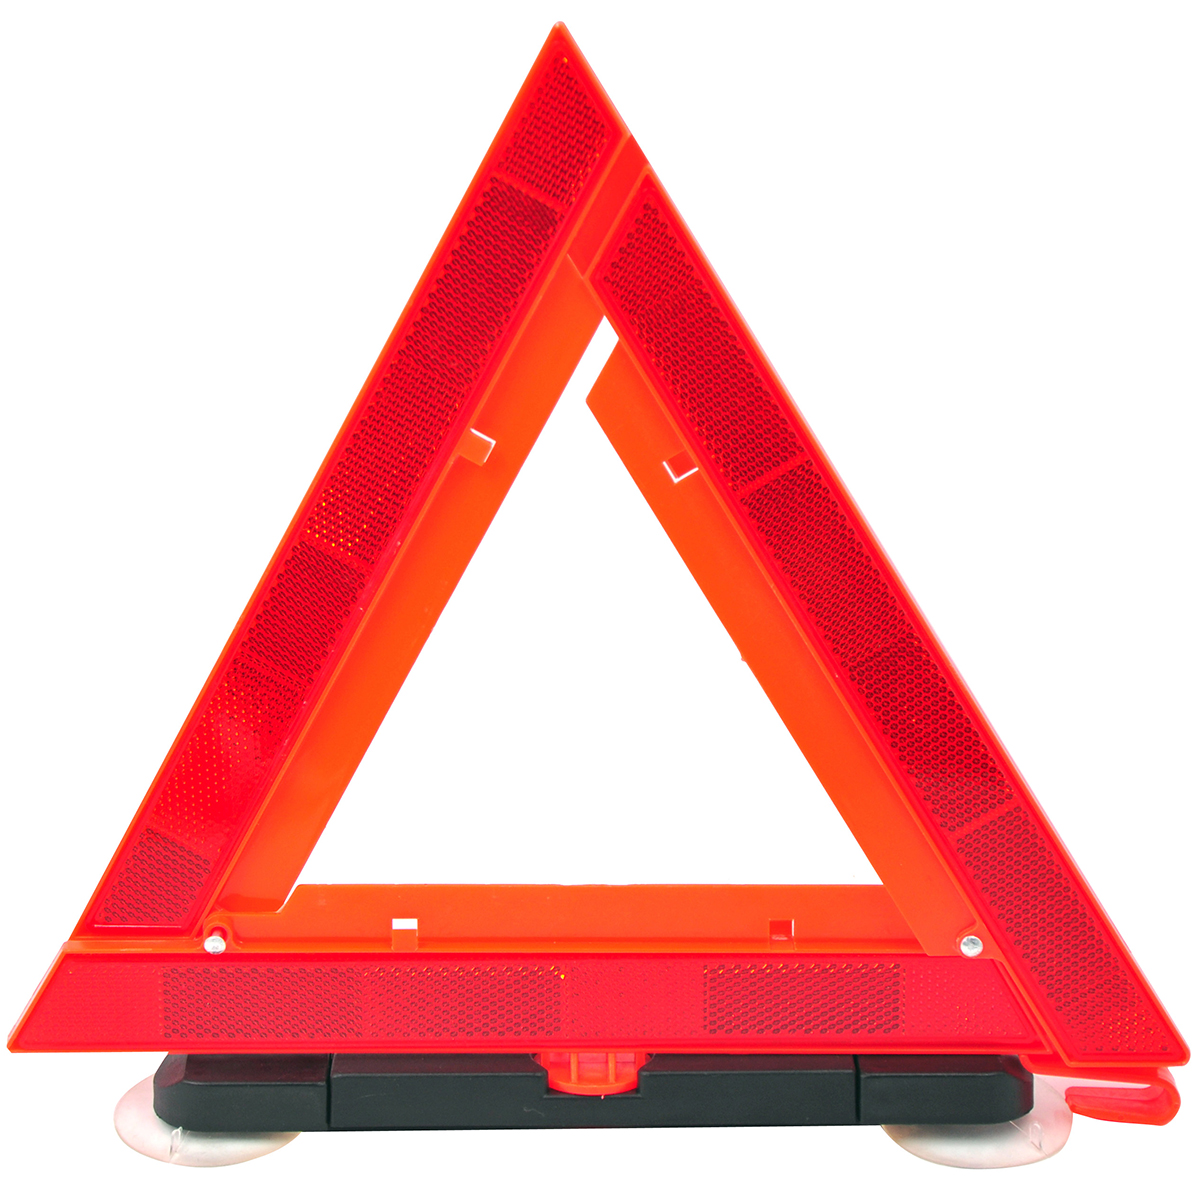 Goodyear Collapsible Safety Triangle GY3020 Window Mount Reflective Portable Roadside Car Warning - Orange